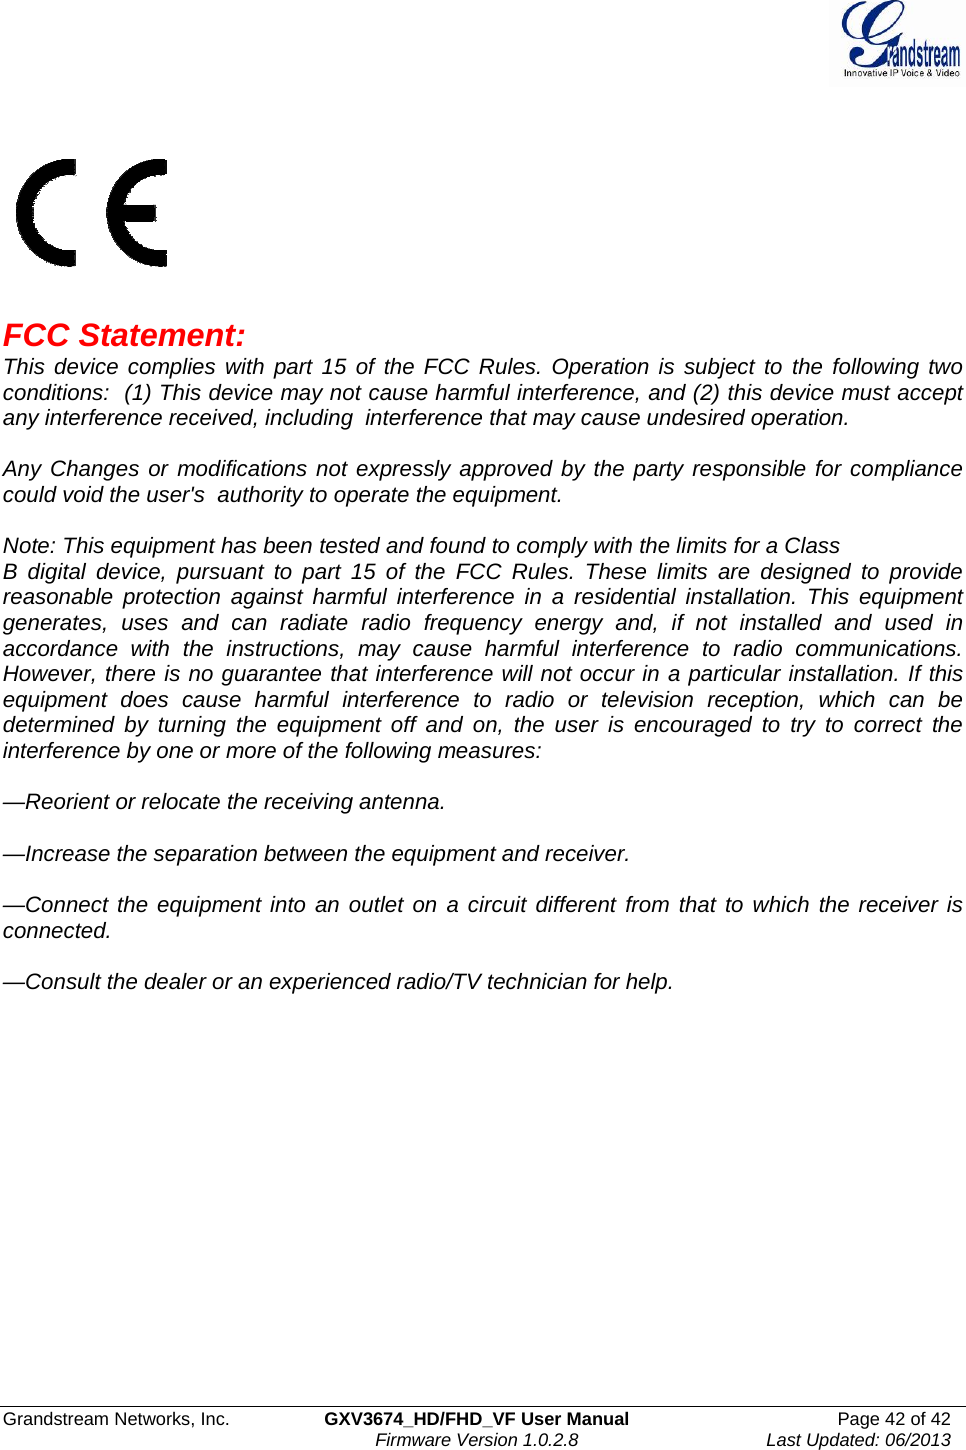  Grandstream Networks, Inc.  GXV3674_HD/FHD_VF User Manual  Page 42 of 42   Firmware Version 1.0.2.8  Last Updated: 06/2013      FCC Statement:    This device complies with part 15 of the FCC Rules. Operation is subject to the following two conditions:  (1) This device may not cause harmful interference, and (2) this device must accept any interference received, including  interference that may cause undesired operation.    Any Changes or modifications not expressly approved by the party responsible for compliance could void the user&apos;s  authority to operate the equipment.     Note: This equipment has been tested and found to comply with the limits for a Class B digital device, pursuant to part 15 of the FCC Rules. These limits are designed to provide reasonable protection against harmful interference in a residential installation. This equipment generates, uses and can radiate radio frequency energy and, if not installed and used in accordance with the instructions, may cause harmful interference to radio communications. However, there is no guarantee that interference will not occur in a particular installation. If this equipment does cause harmful interference to radio or television reception, which can be determined by turning the equipment off and on, the user is encouraged to try to correct the interference by one or more of the following measures:   —Reorient or relocate the receiving antenna.   —Increase the separation between the equipment and receiver.   —Connect the equipment into an outlet on a circuit different from that to which the receiver is connected.  —Consult the dealer or an experienced radio/TV technician for help. 